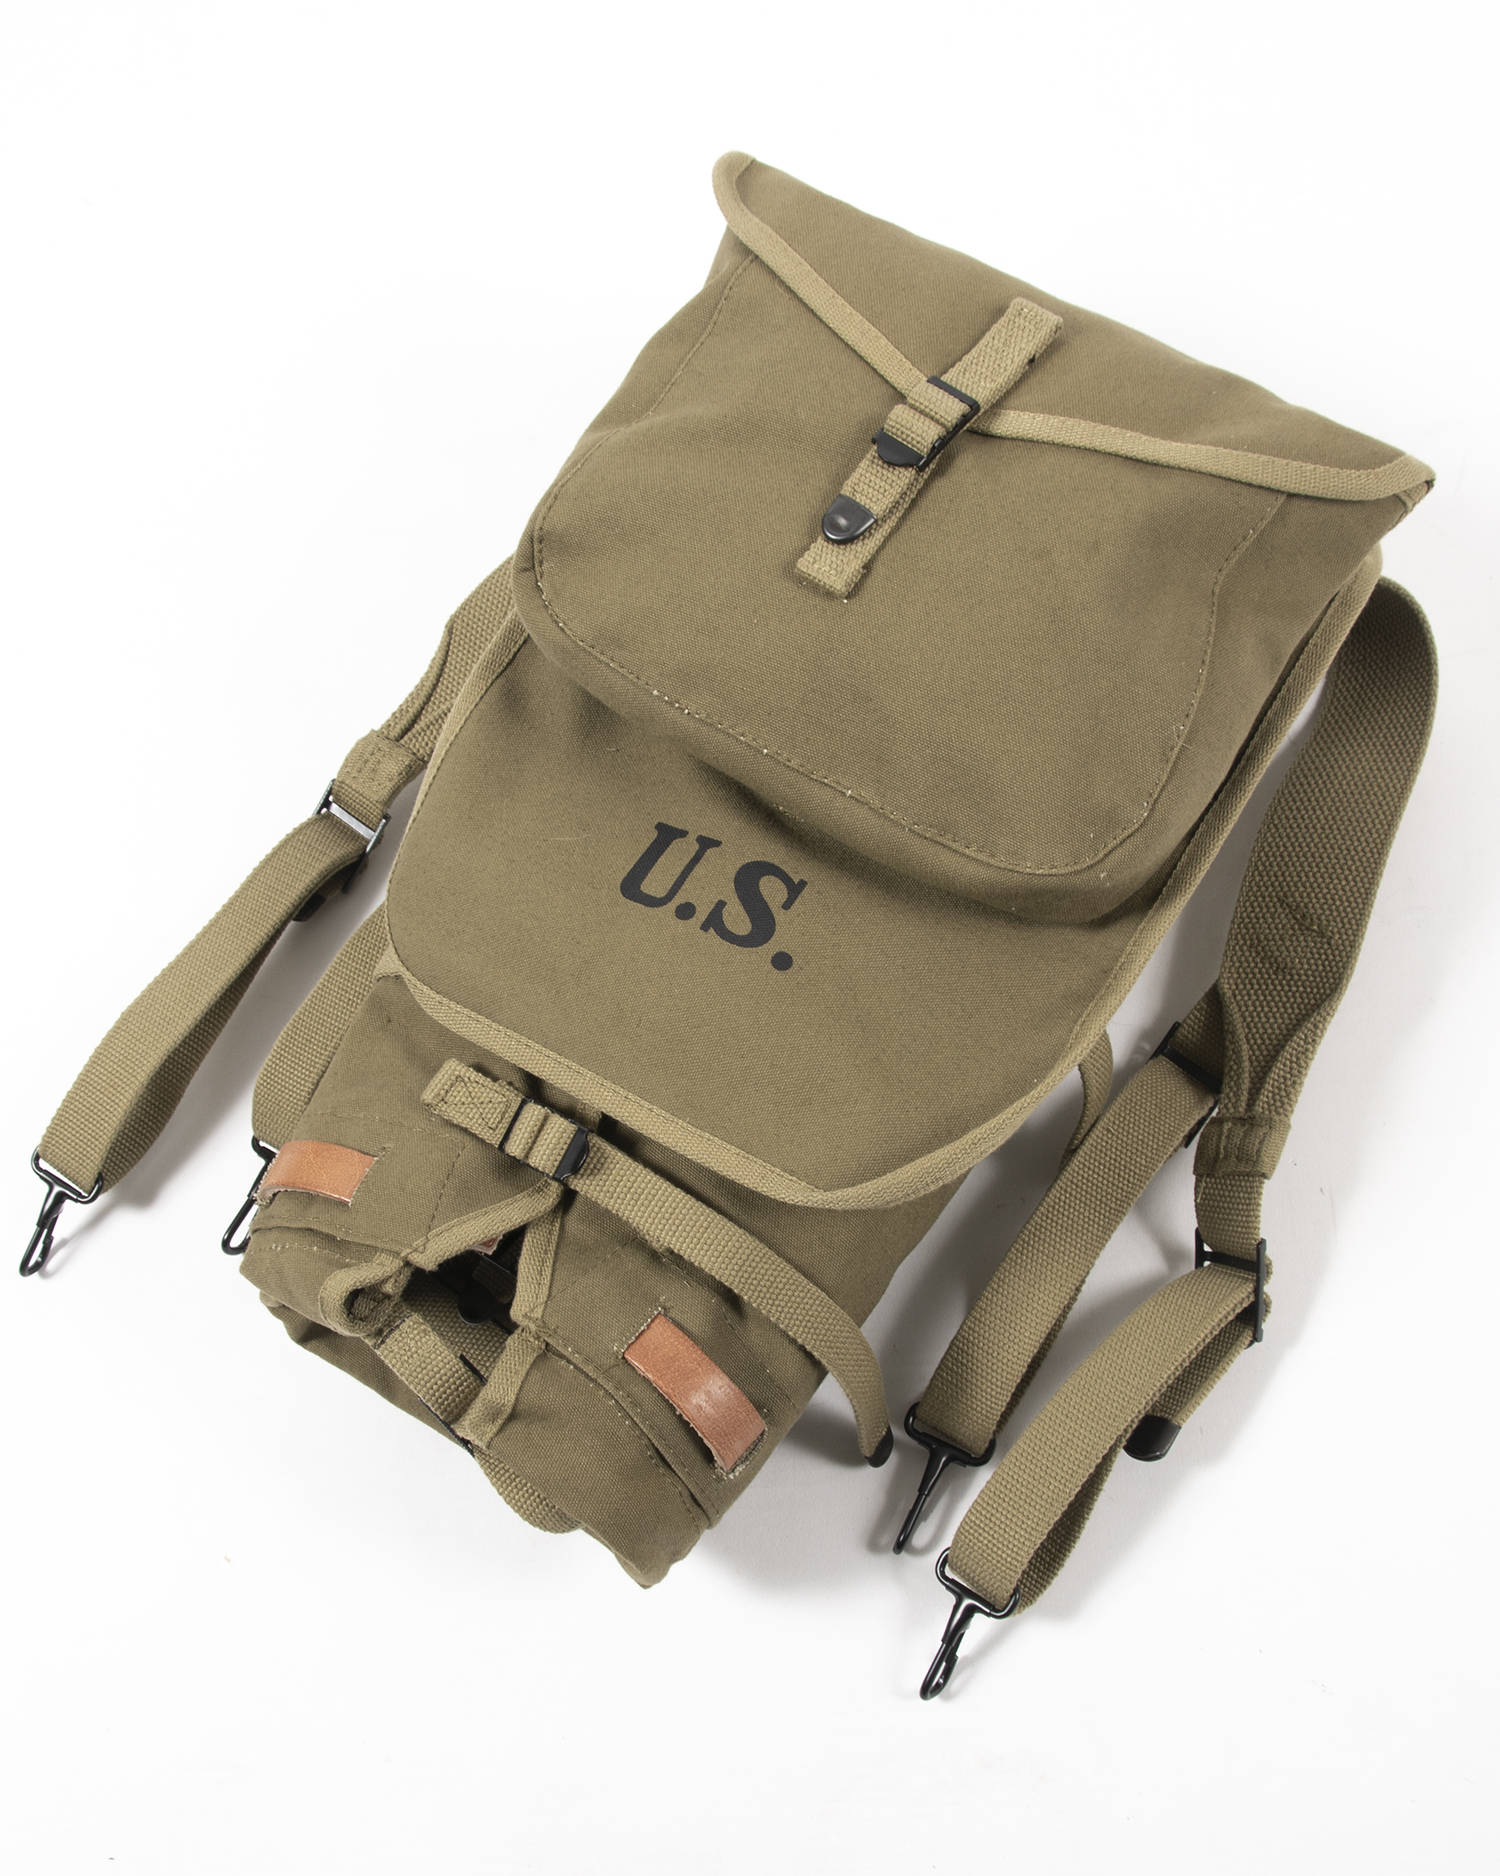 Details about   WWII US ARMY 1942 M1928 HAVERSACK KNAPSACK Military BACKPACK  High Quality